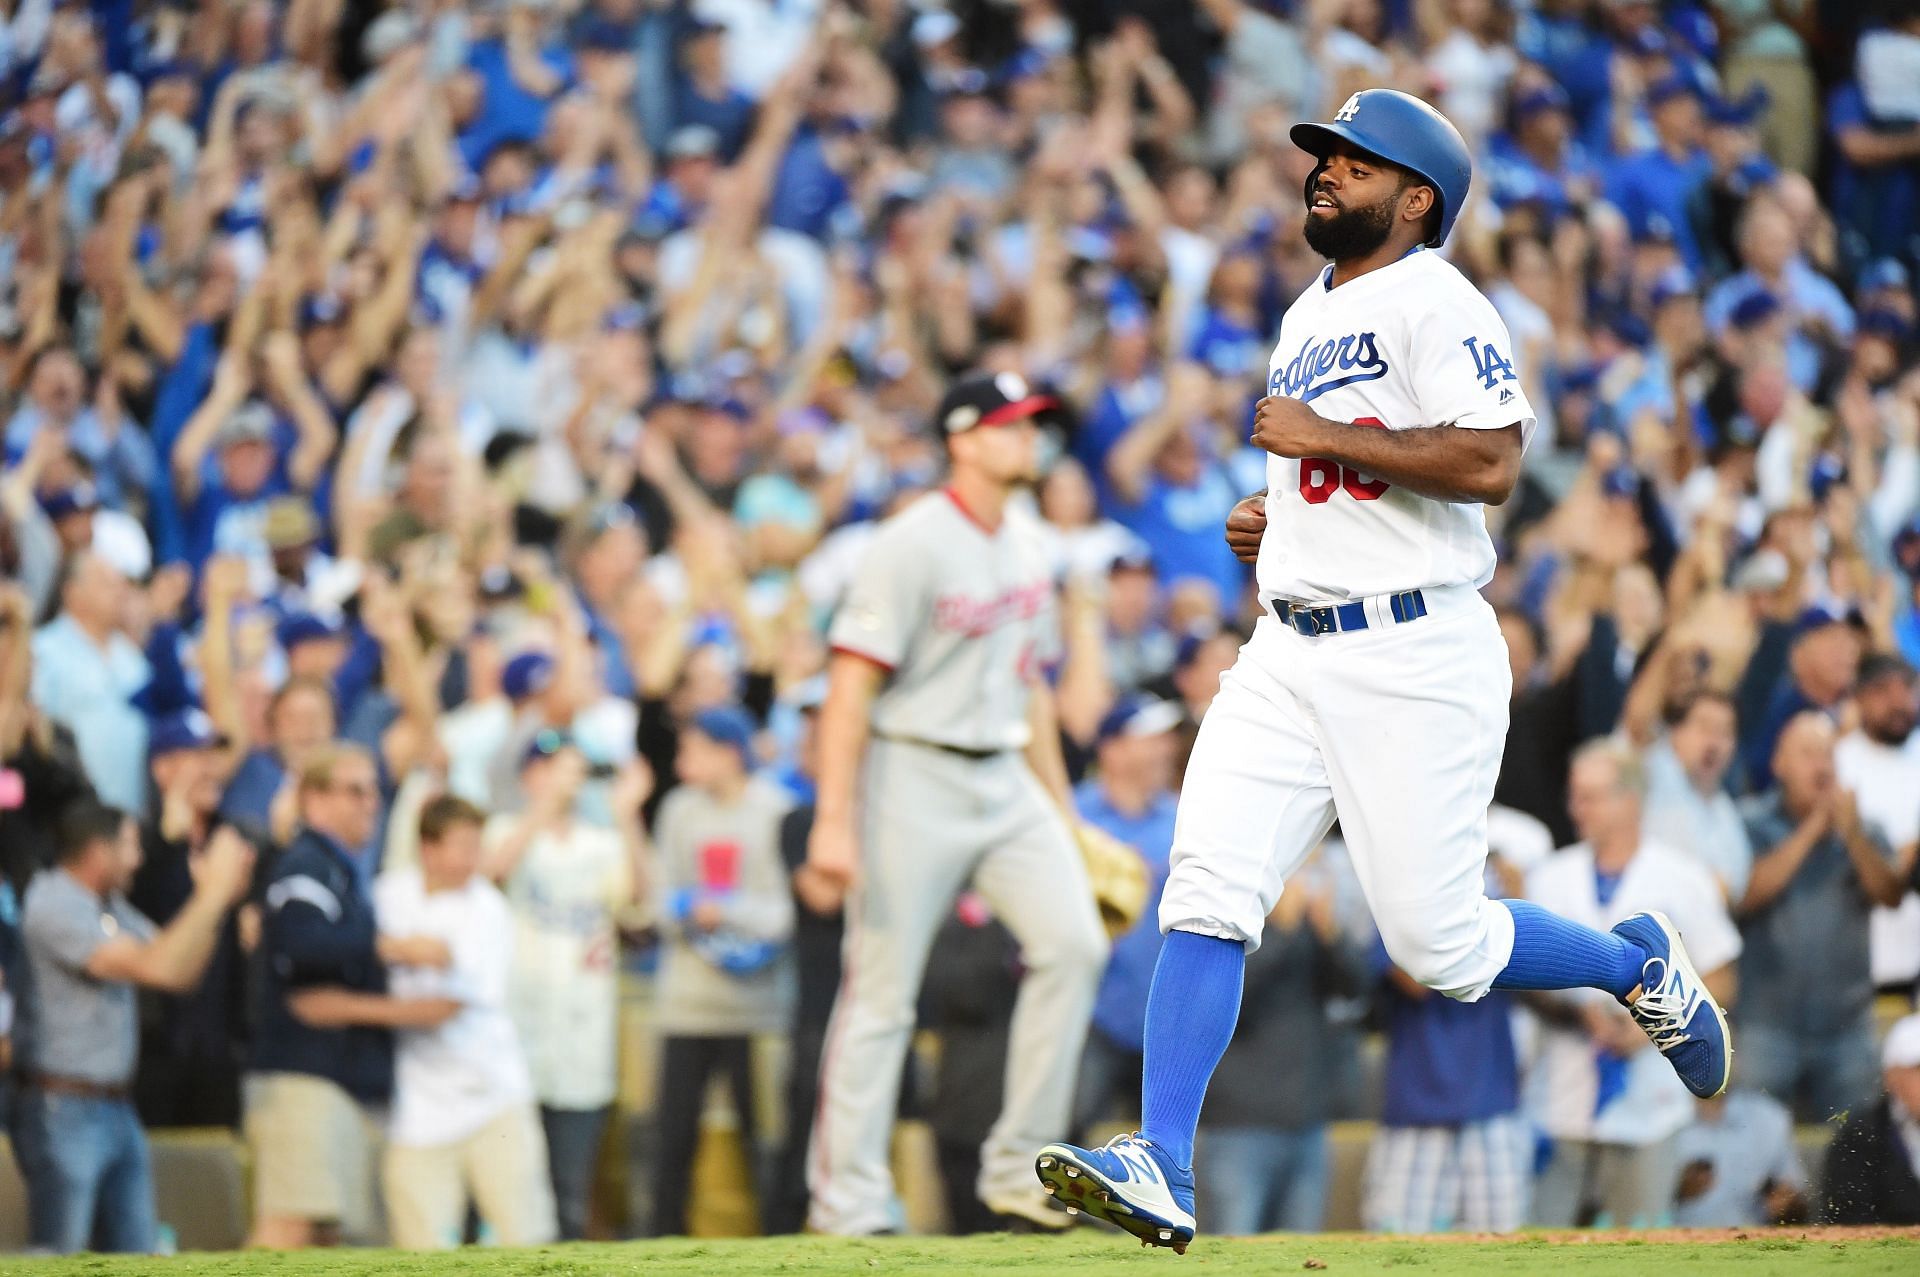 LA Dodgers extend Andrew Toles' contract, so outfielder can keep